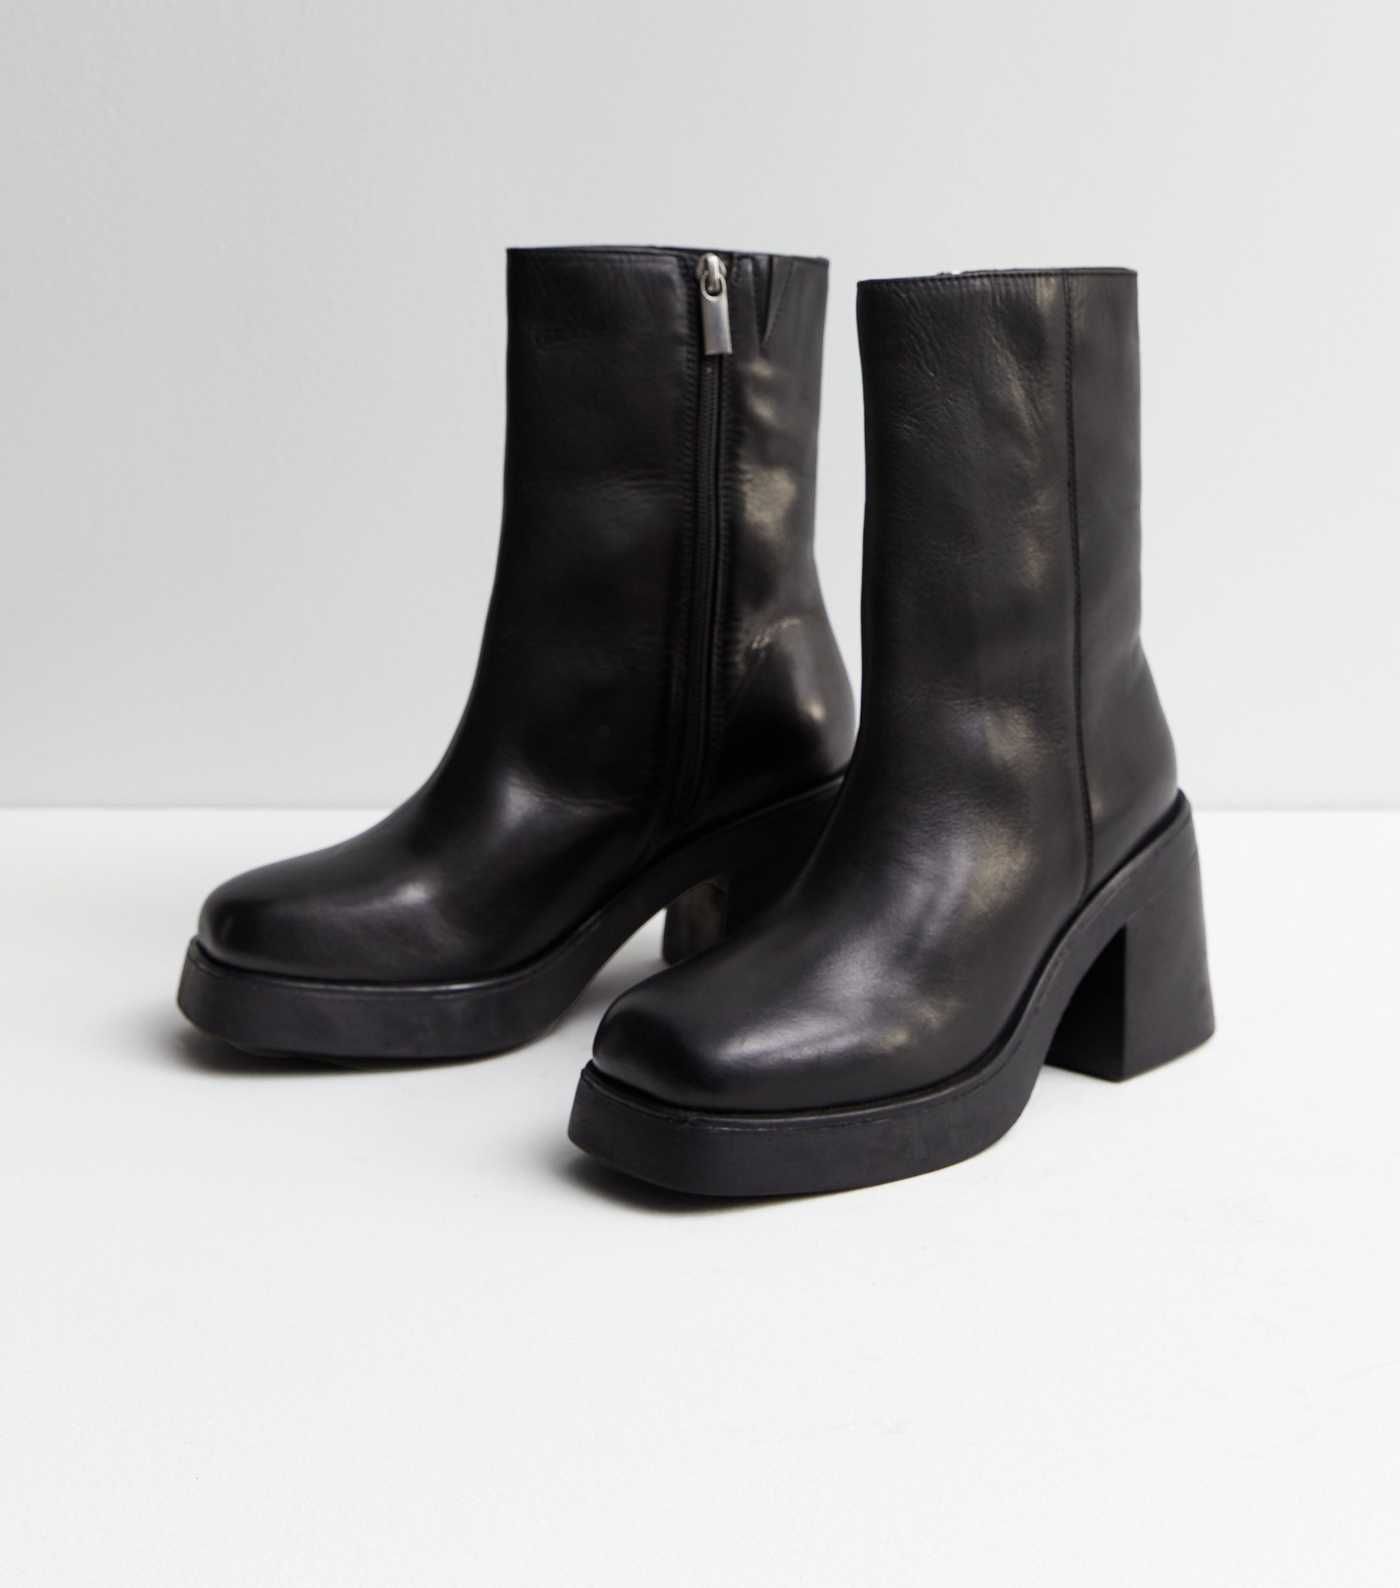 Black Leather Chunky Block Heel Boots
						
						Add to Saved Items
						Remove from Saved Ite... | New Look (UK)